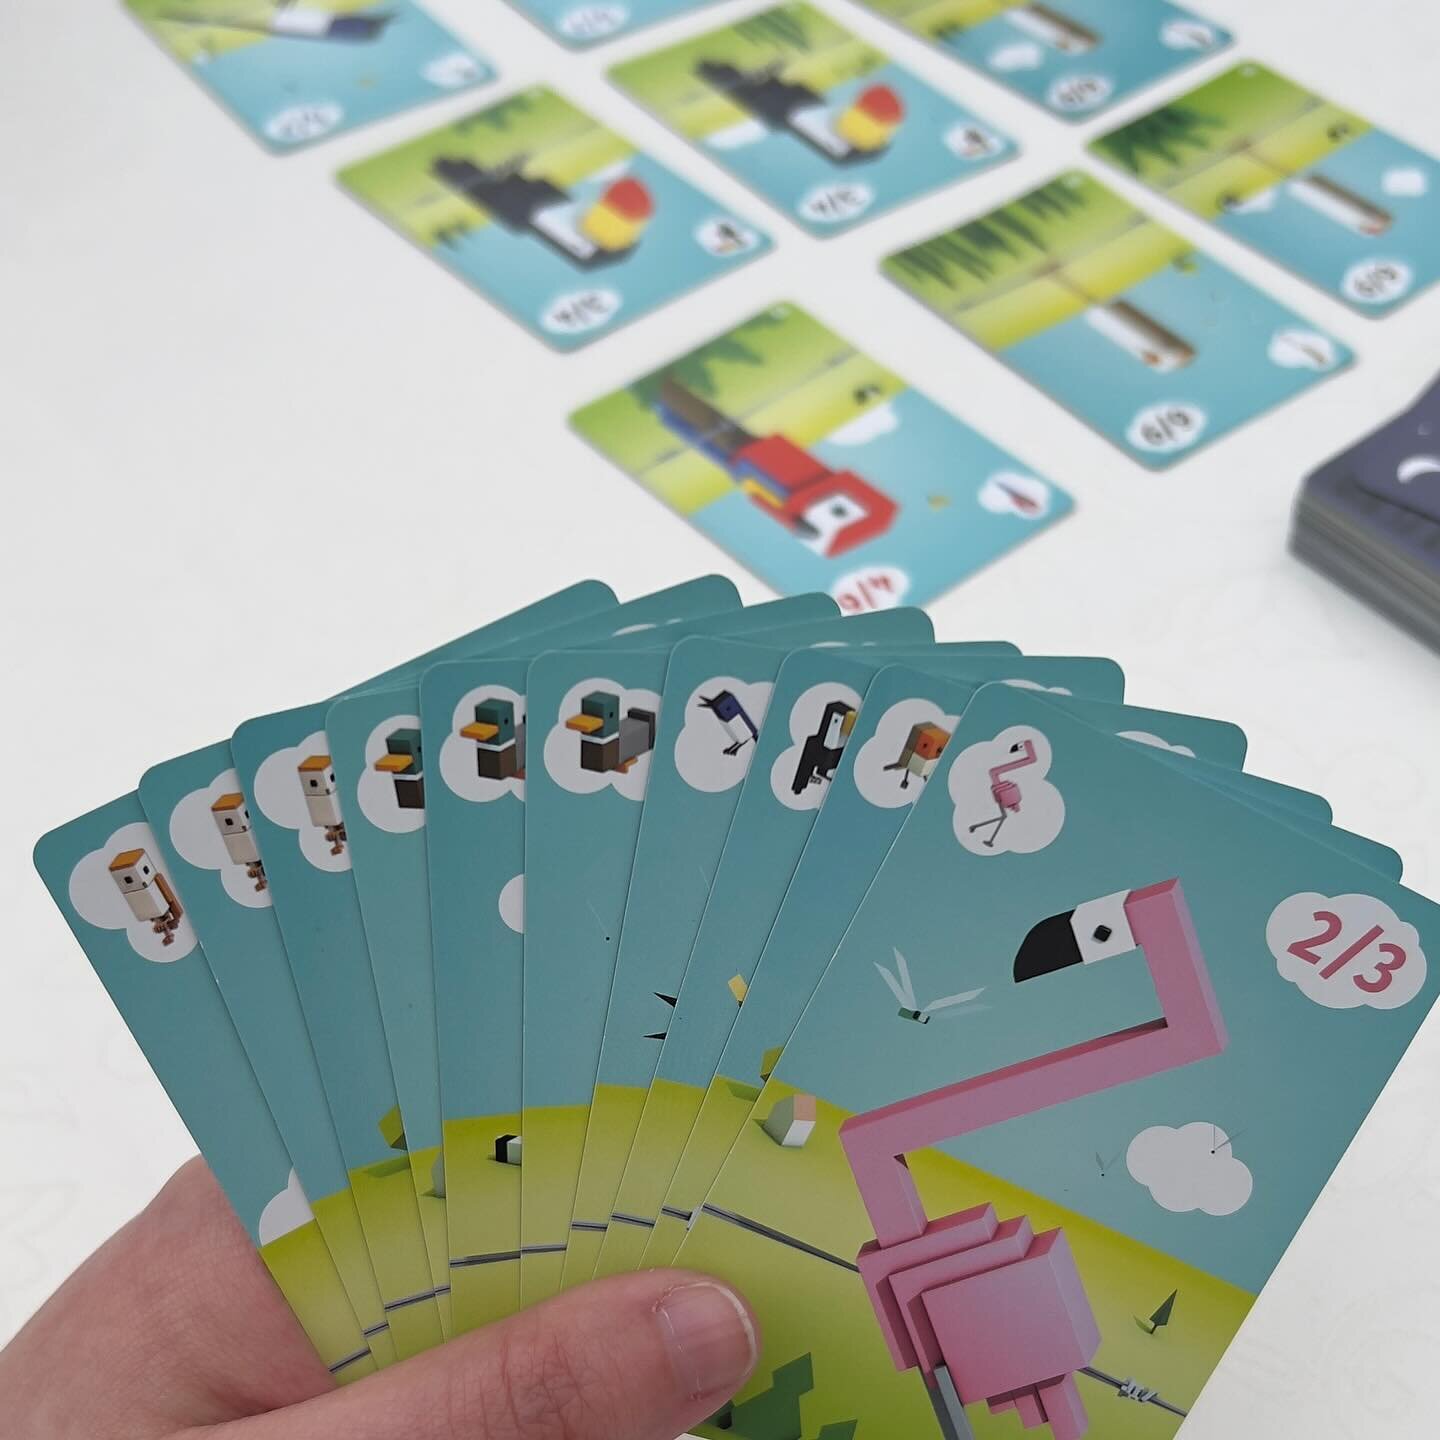 🇵🇹⬇️//🇬🇧 During the third official day we only had the chance to play Cubirds. We were also explaining games at the Maldito Games&rsquo; booth (with special focus on Applejack and some Cubirds and The Search for Planet X in between). 🌎 
.
In the